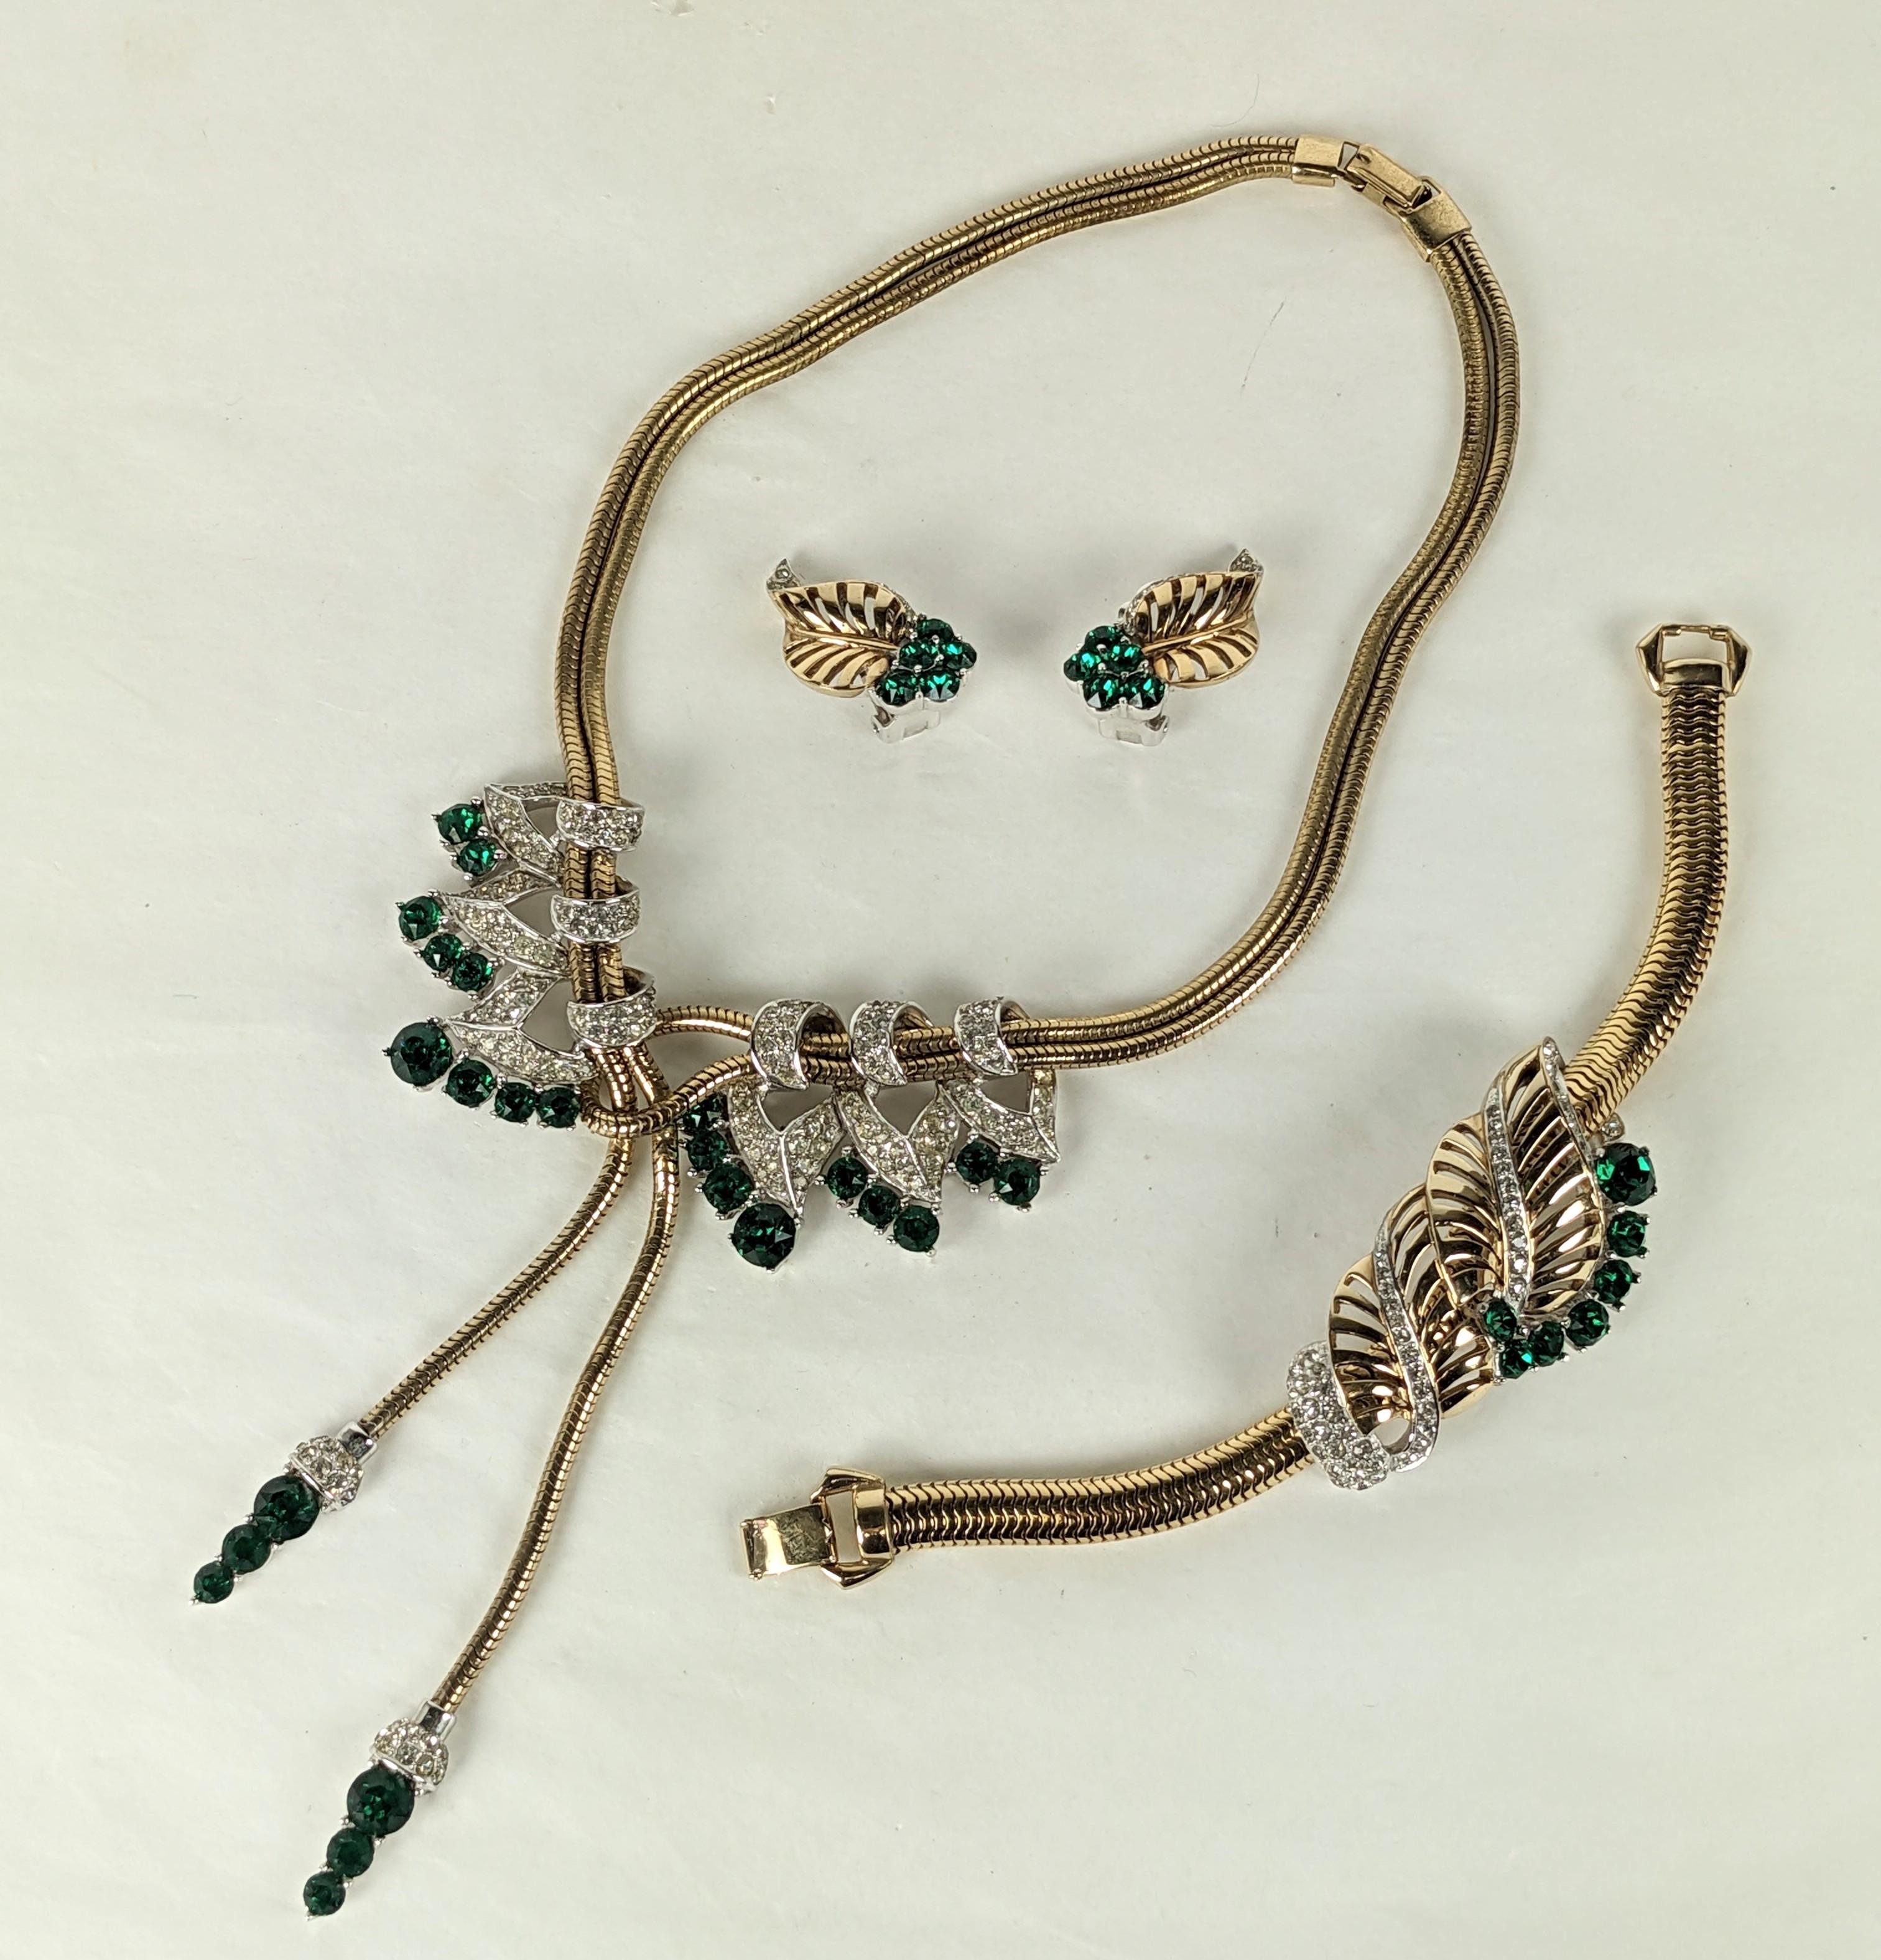 Exceptional Marcel Boucher Retro Emerald Paste Parure from the 1940's. Gas pipe chain used with pave and emerald paste retro motifs. Tassel drop necklace and retro leaf bracelet with matching clip earrings. Early MB mark, 1940's USA.
